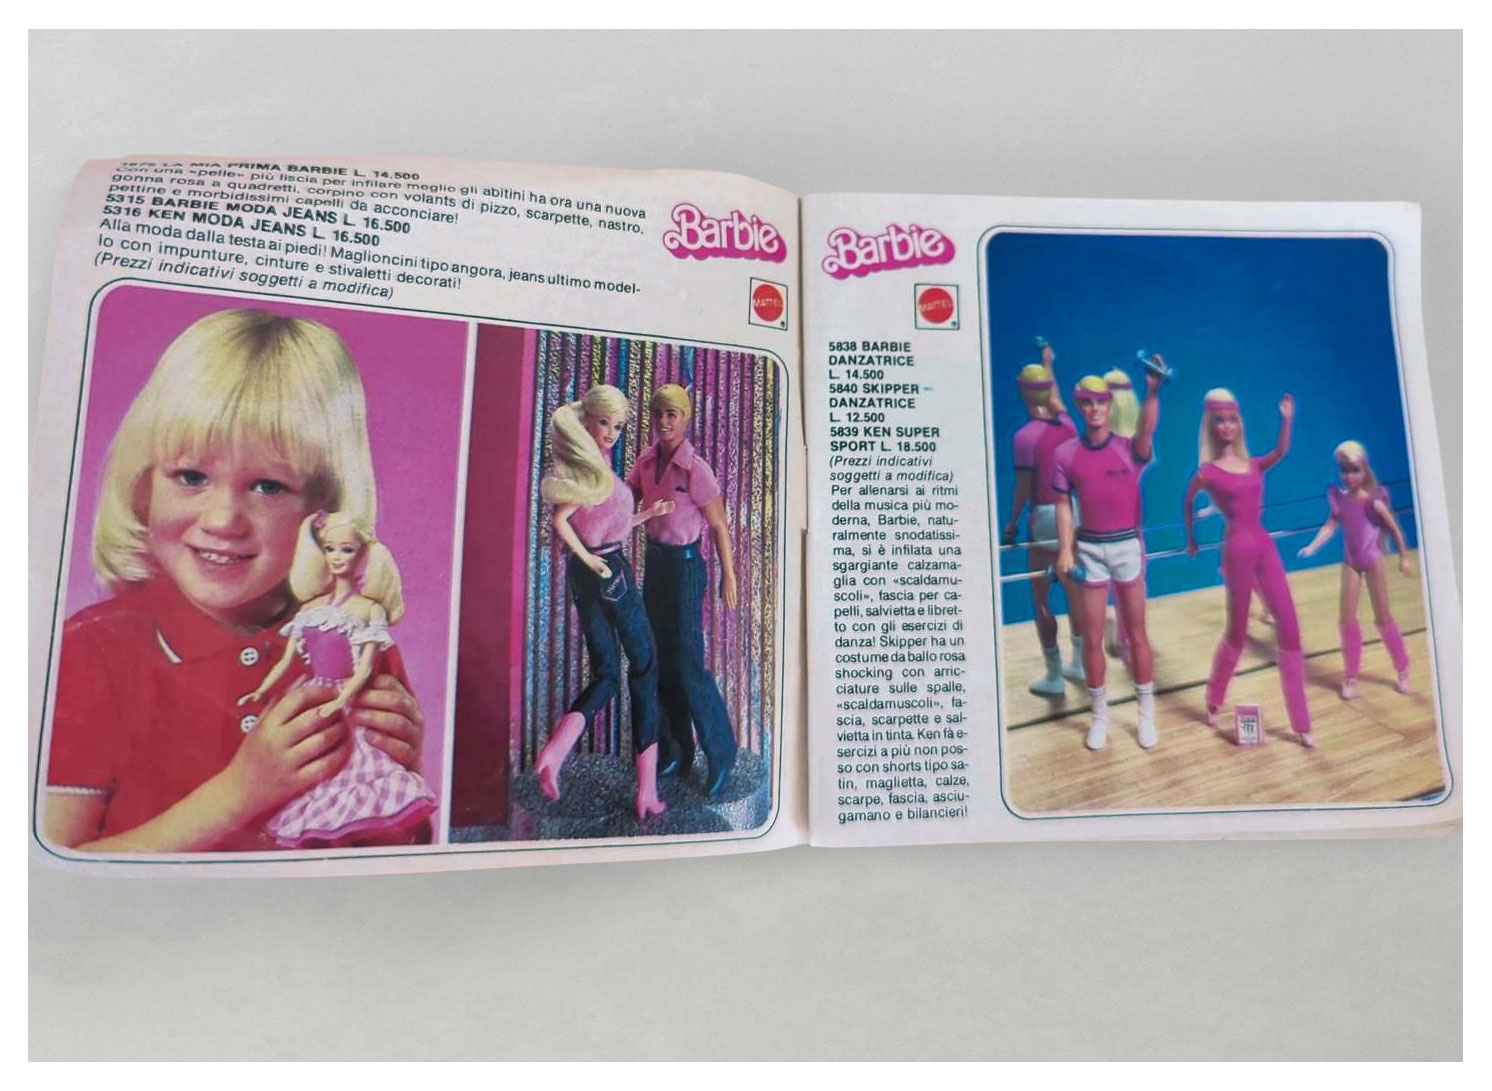 From 1983 Italian Barbie booklet